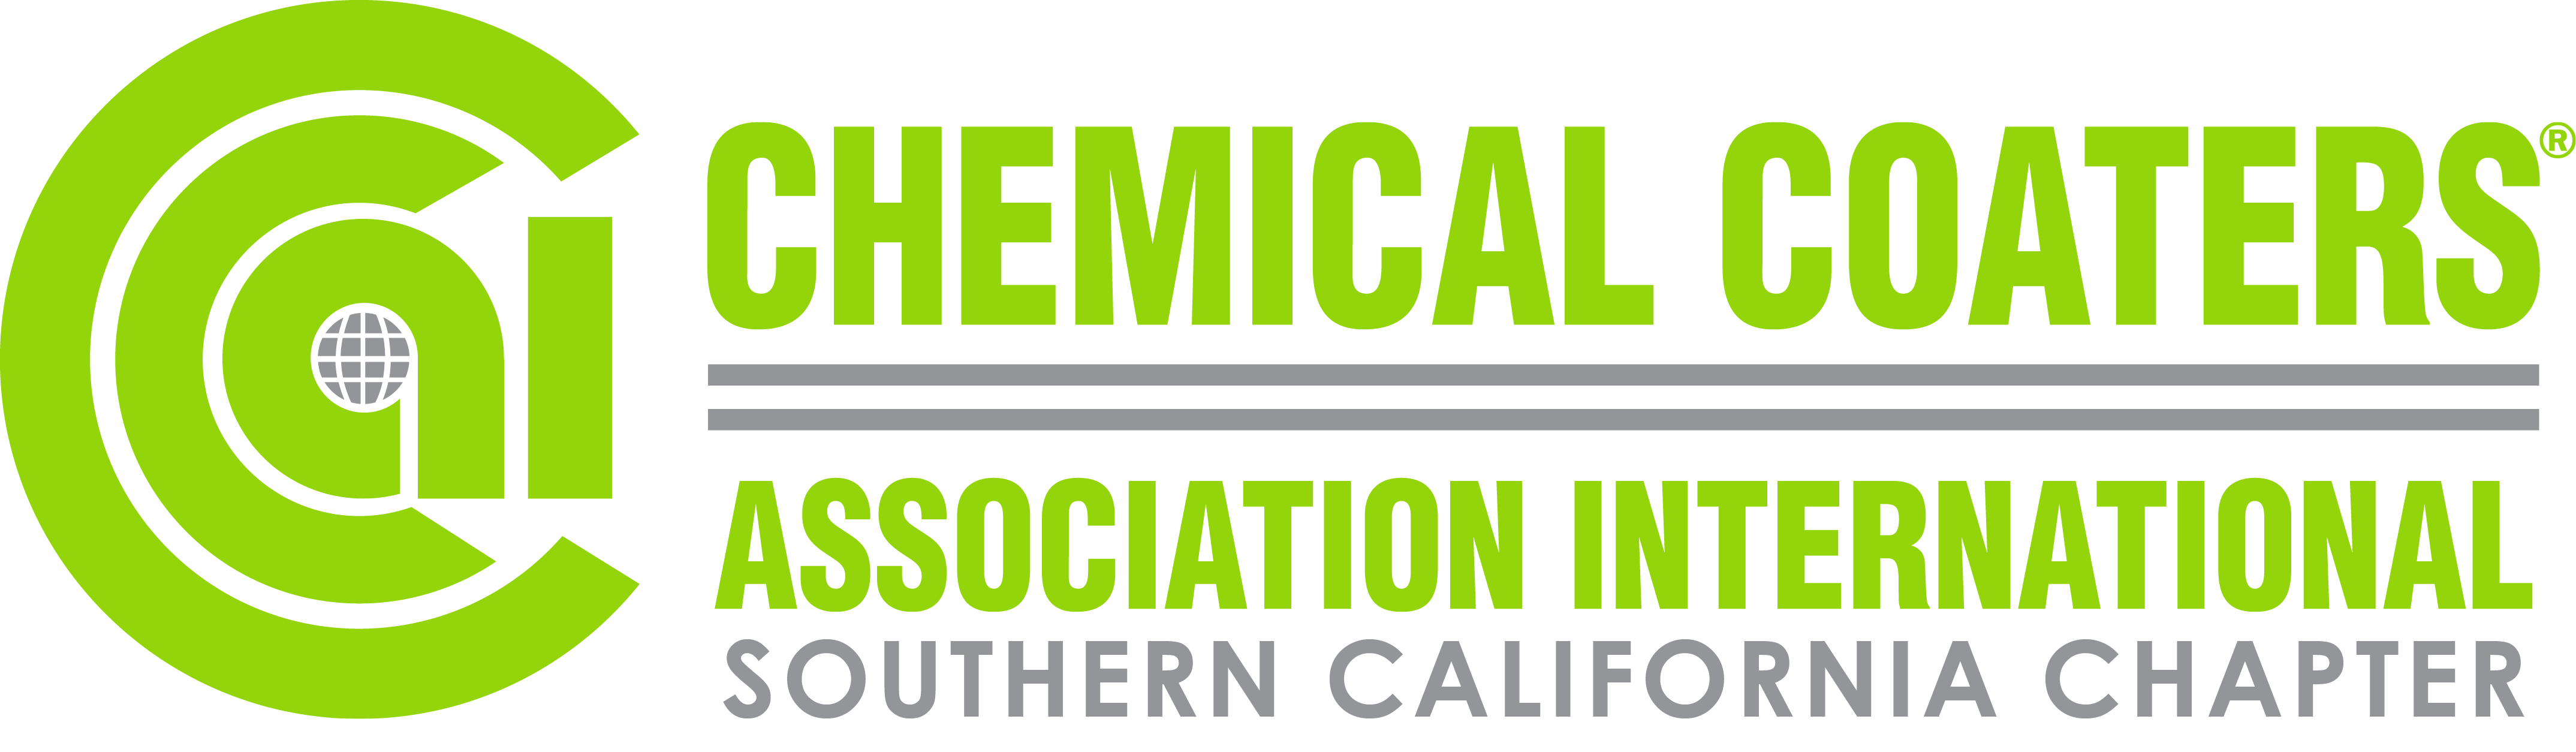 Table : Chemical Coaters Association International - Southern California Chapter